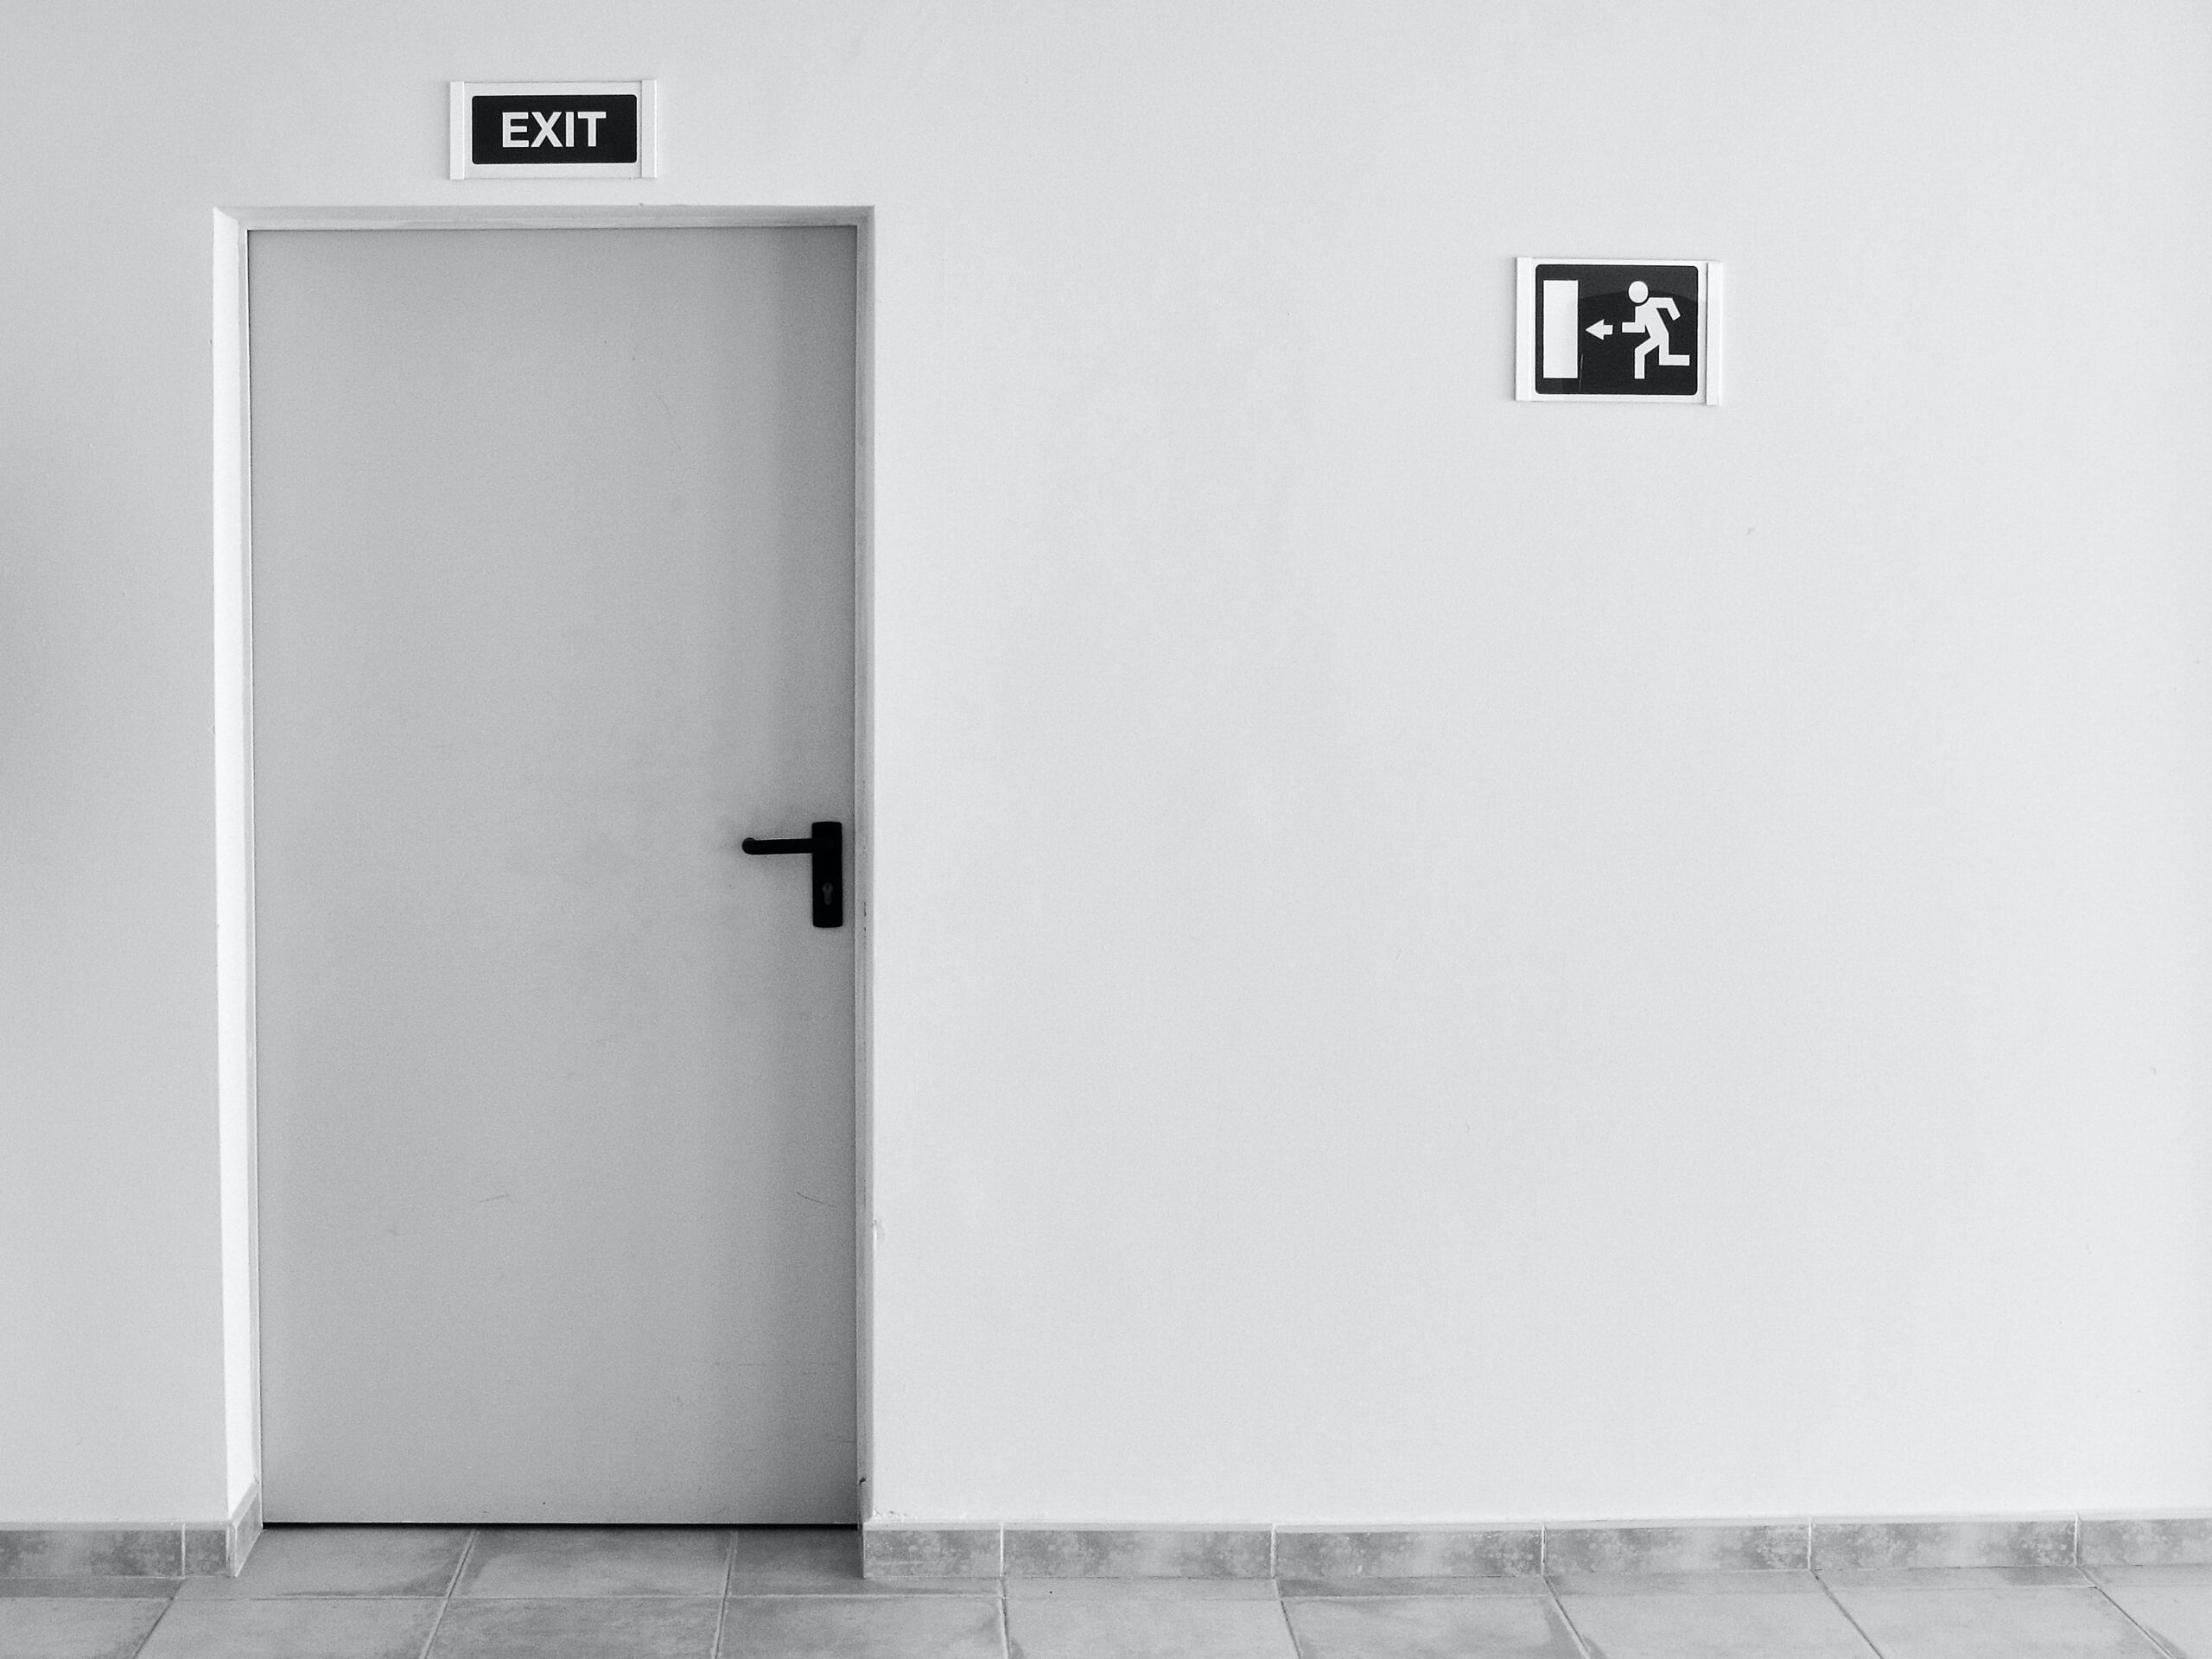 An image of a white commercial door against a white wall.